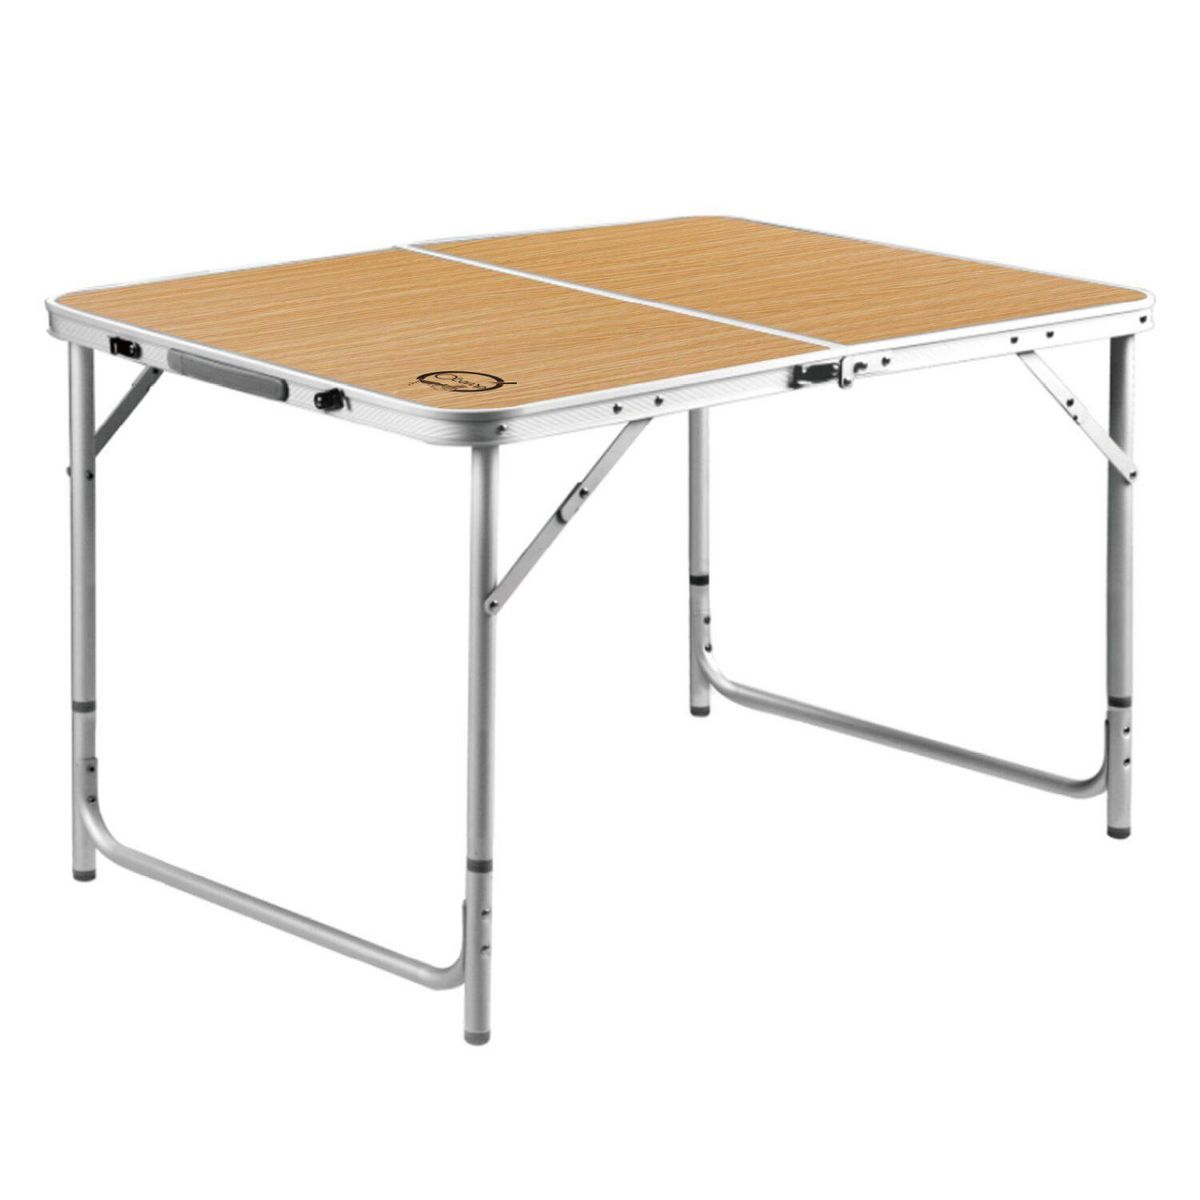 O'Camp Table de camping pliable 6 places - O'Camp - Forme valise